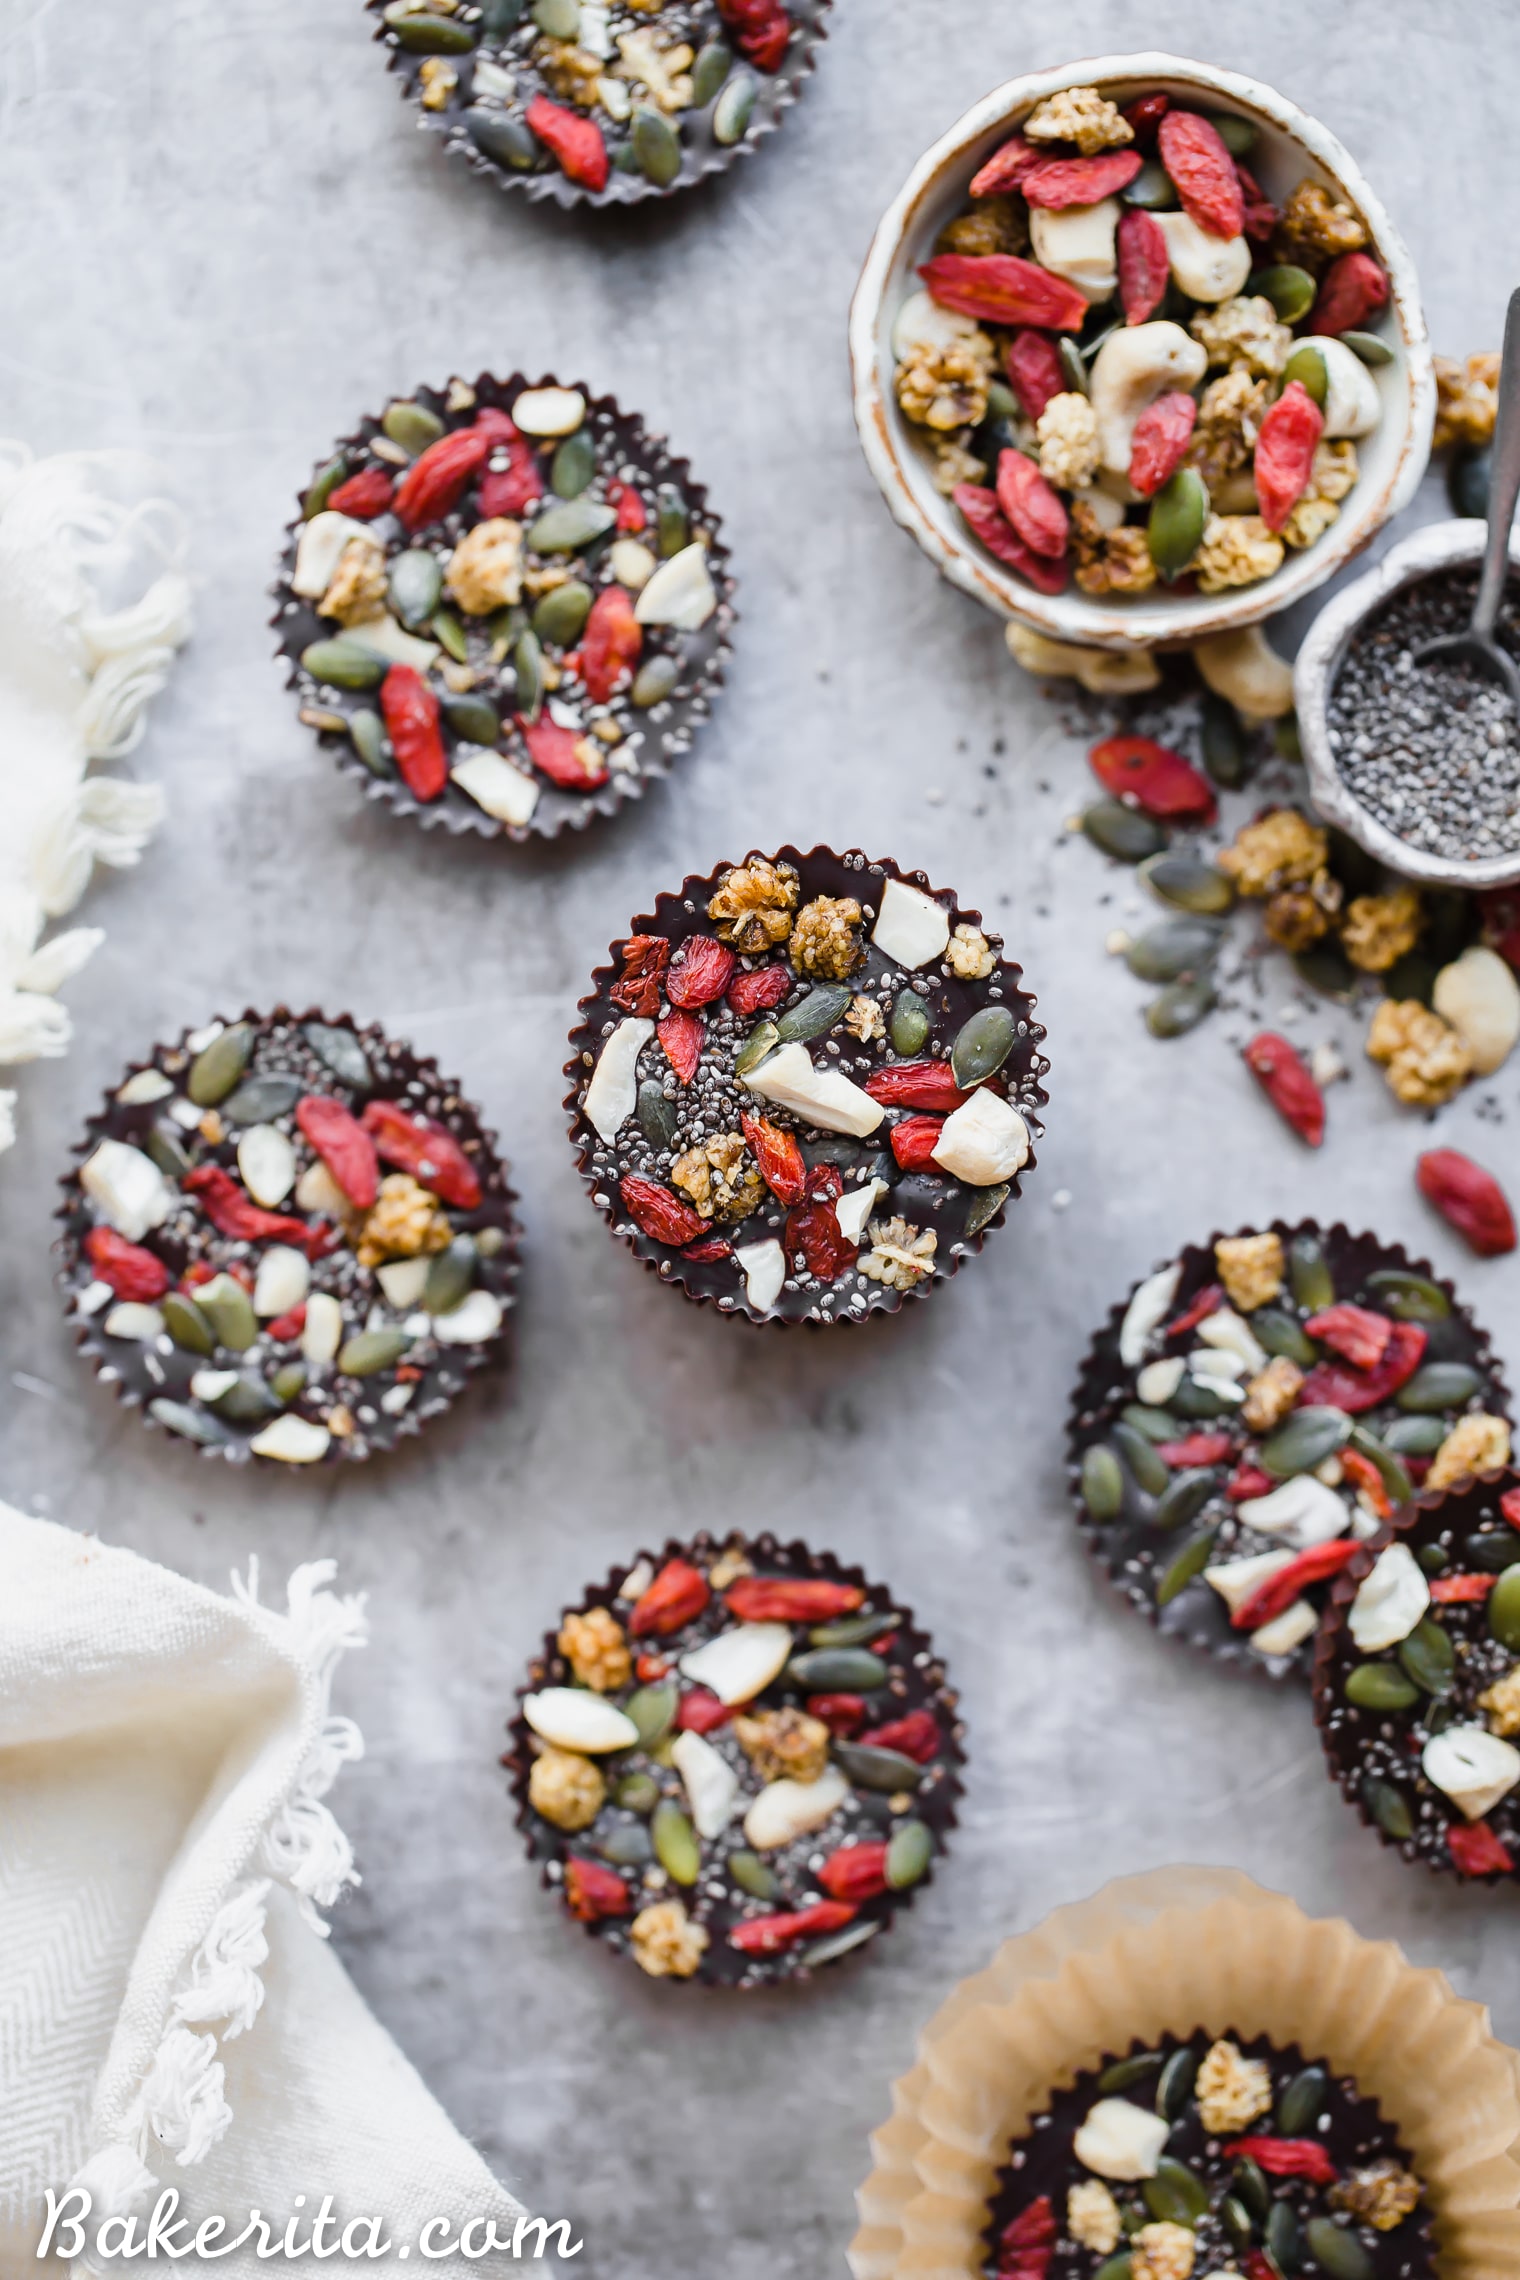 These Superfood Cacao Fudge Bites are creamy, so rich in cacao flavor, and topped with all sorts of delicious superfoods, like cashews, goji berries, chia seeds, and more. They'll satisfy your candy craving and they're gluten-free, paleo, and vegan!